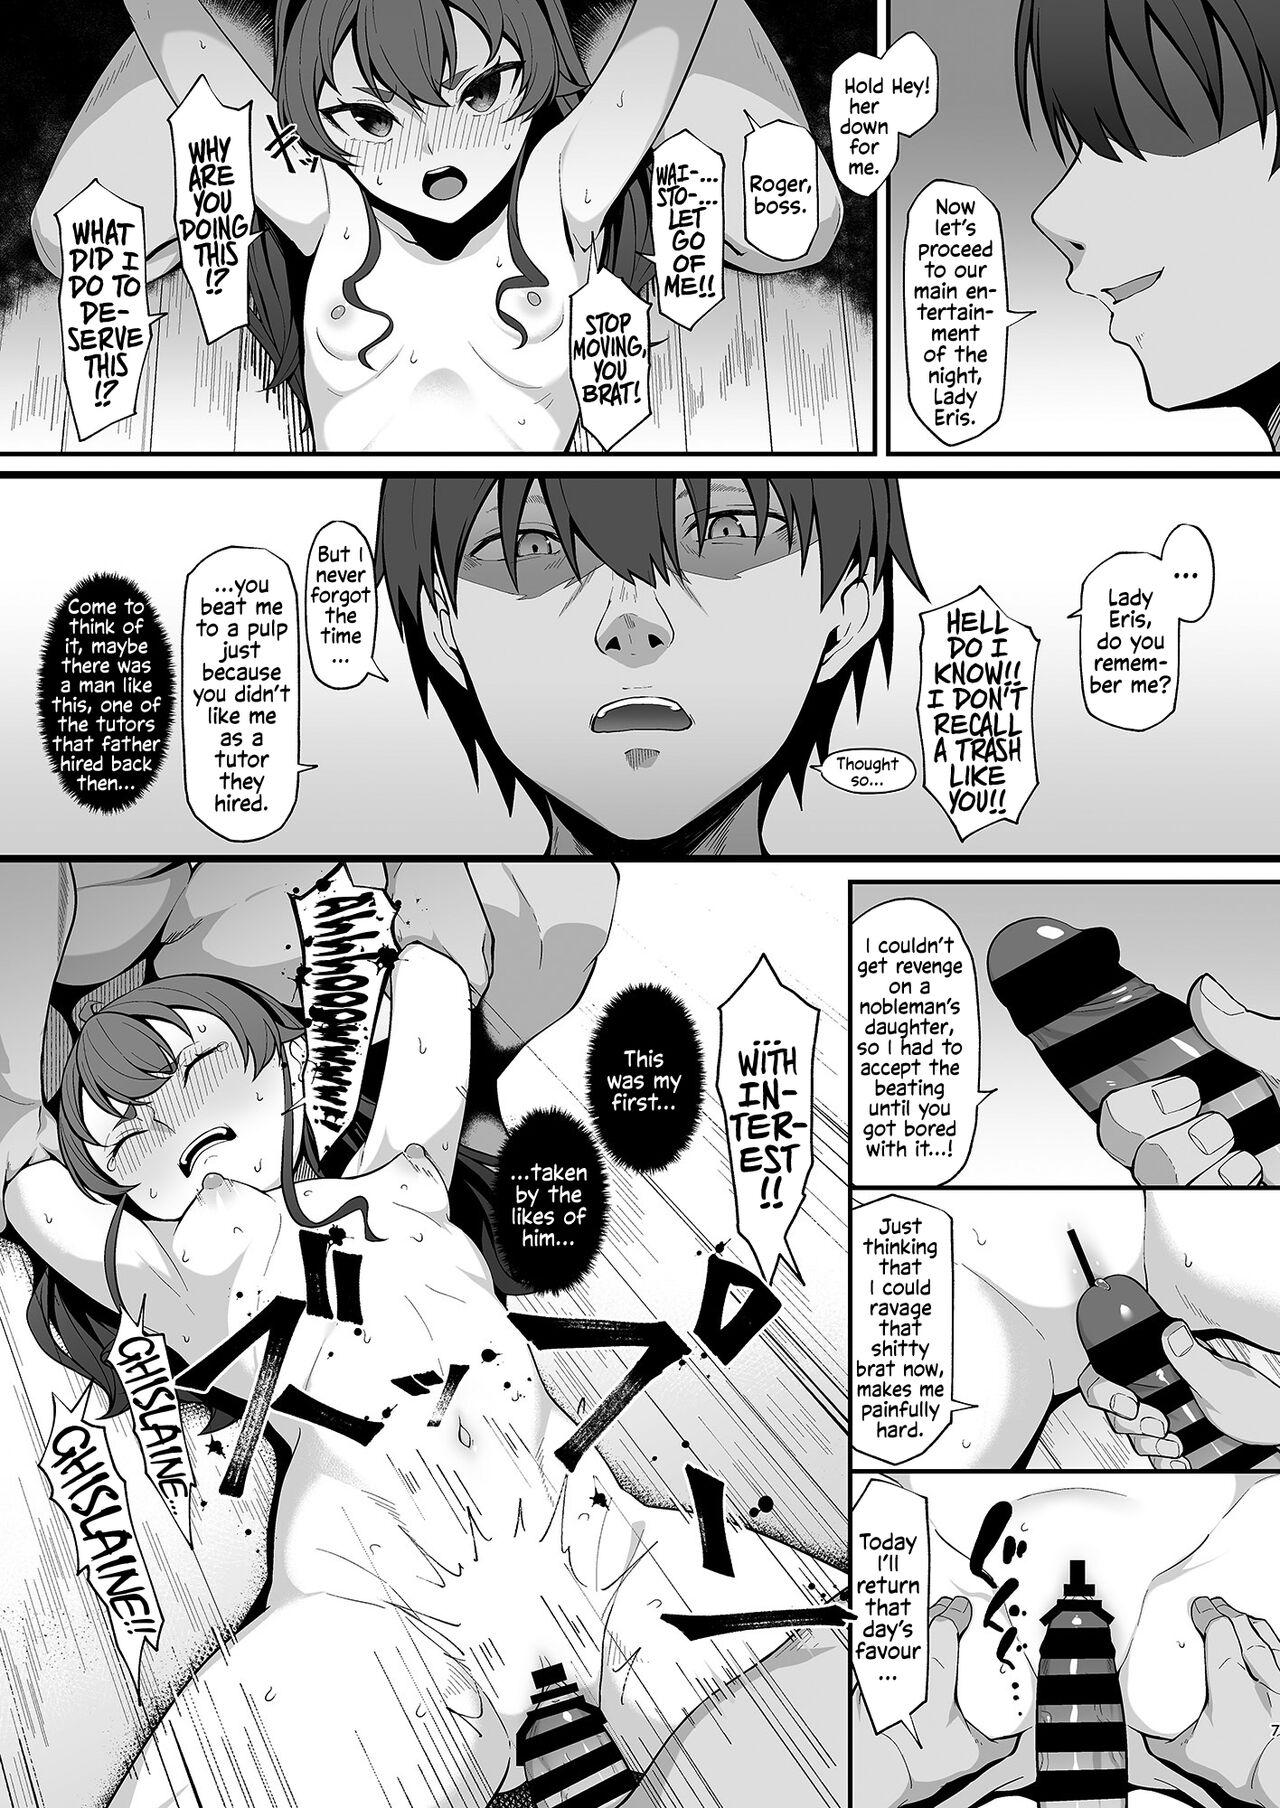 Dominate You reap what you sow, Lady Eris + Omake - Mushoku tensei Amature Porn - Page 6